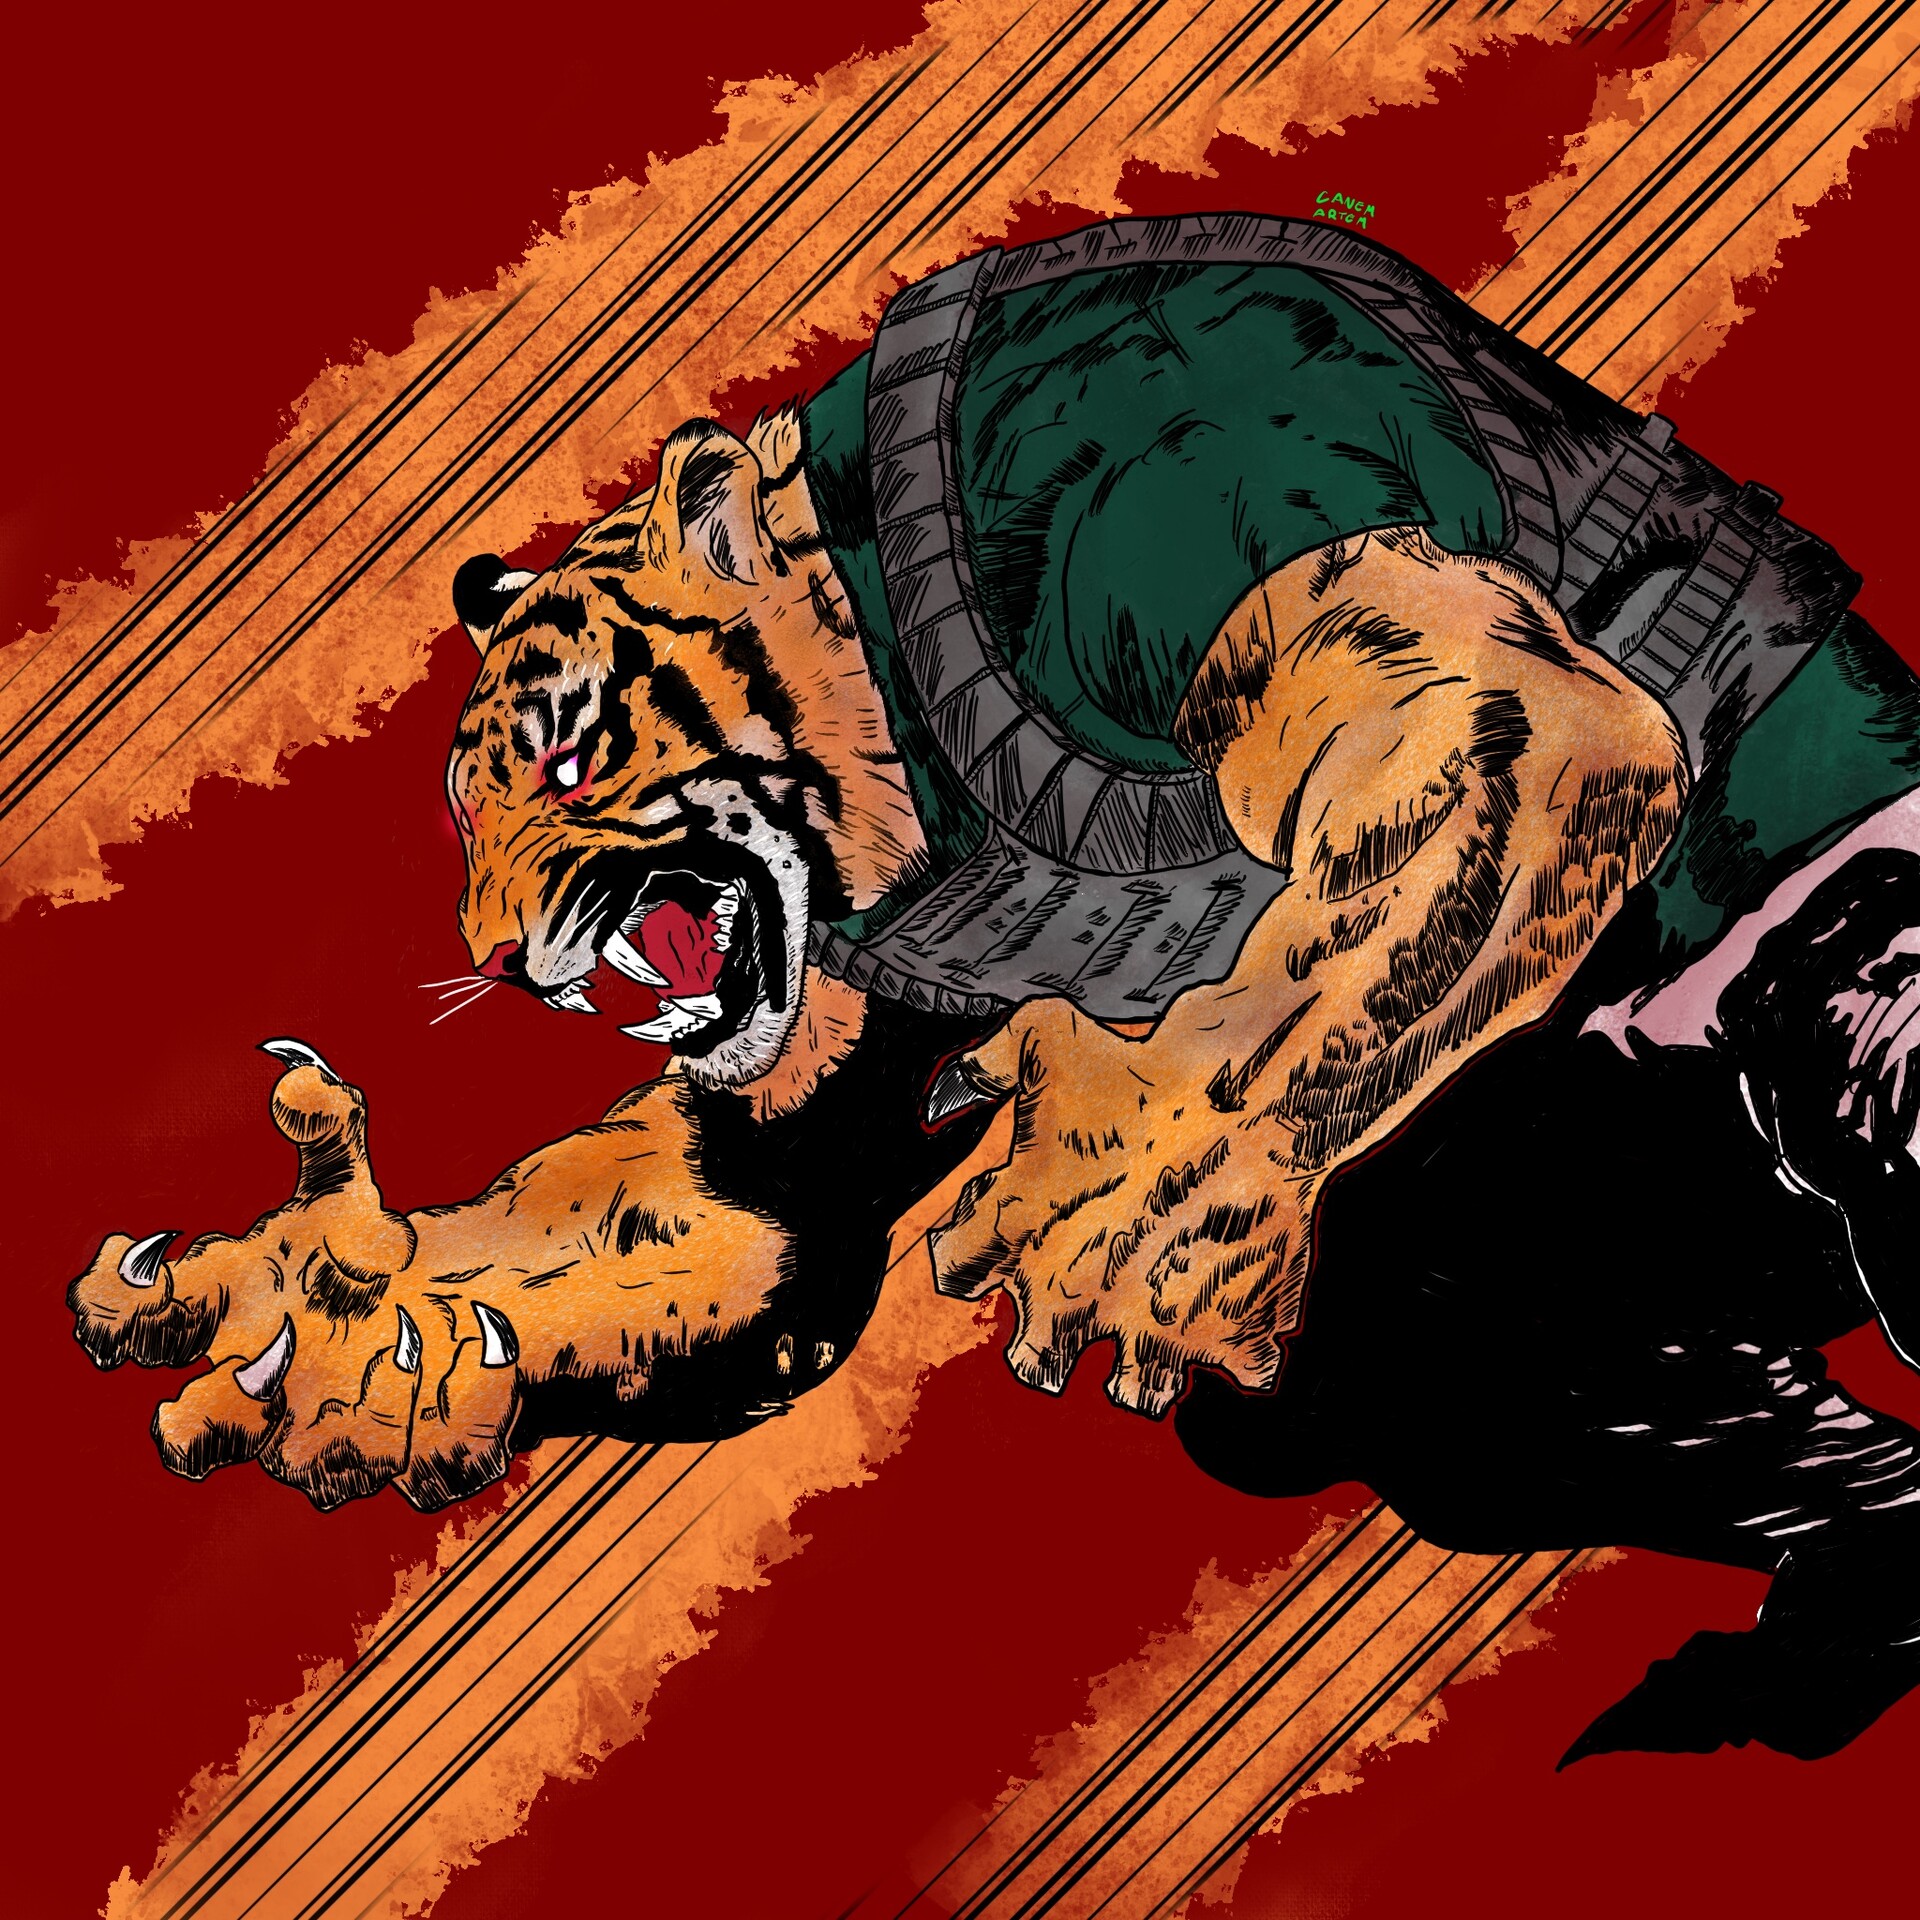 Fanart of Tony the tiger, from the videogame Hotline Miami. 